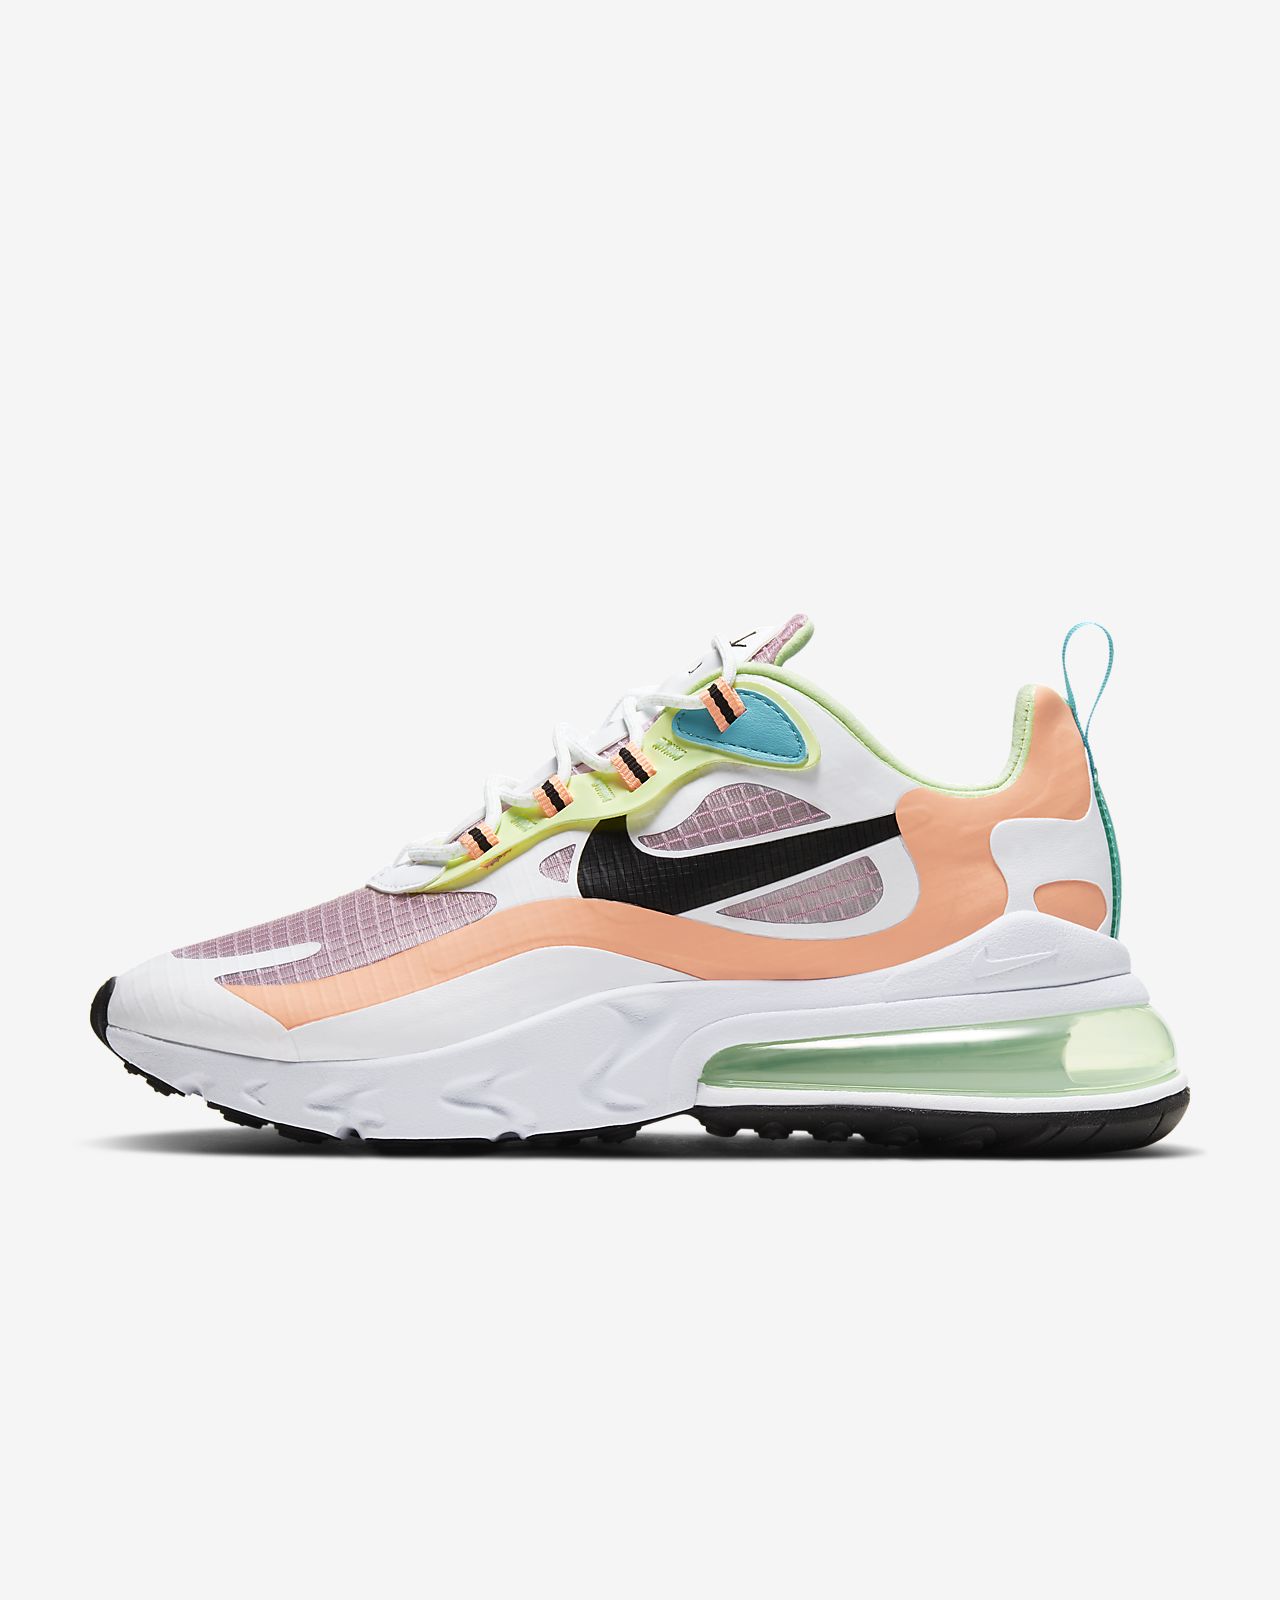 nike women's air max 270 shoes pink 